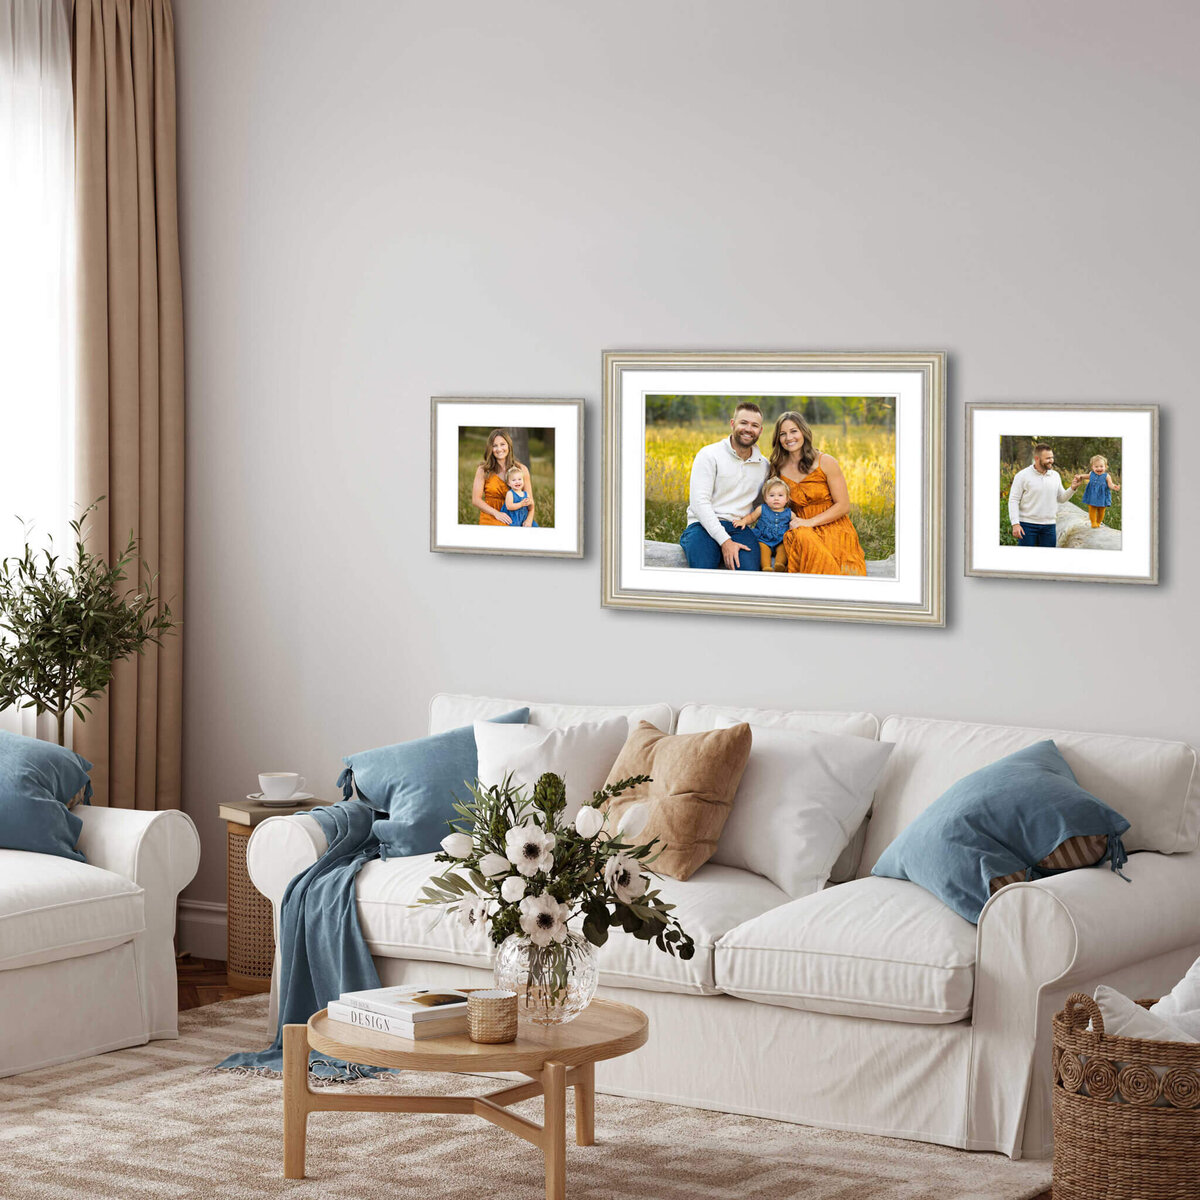 series of three framed pictures of a family hanging on a wall above a white living room couch